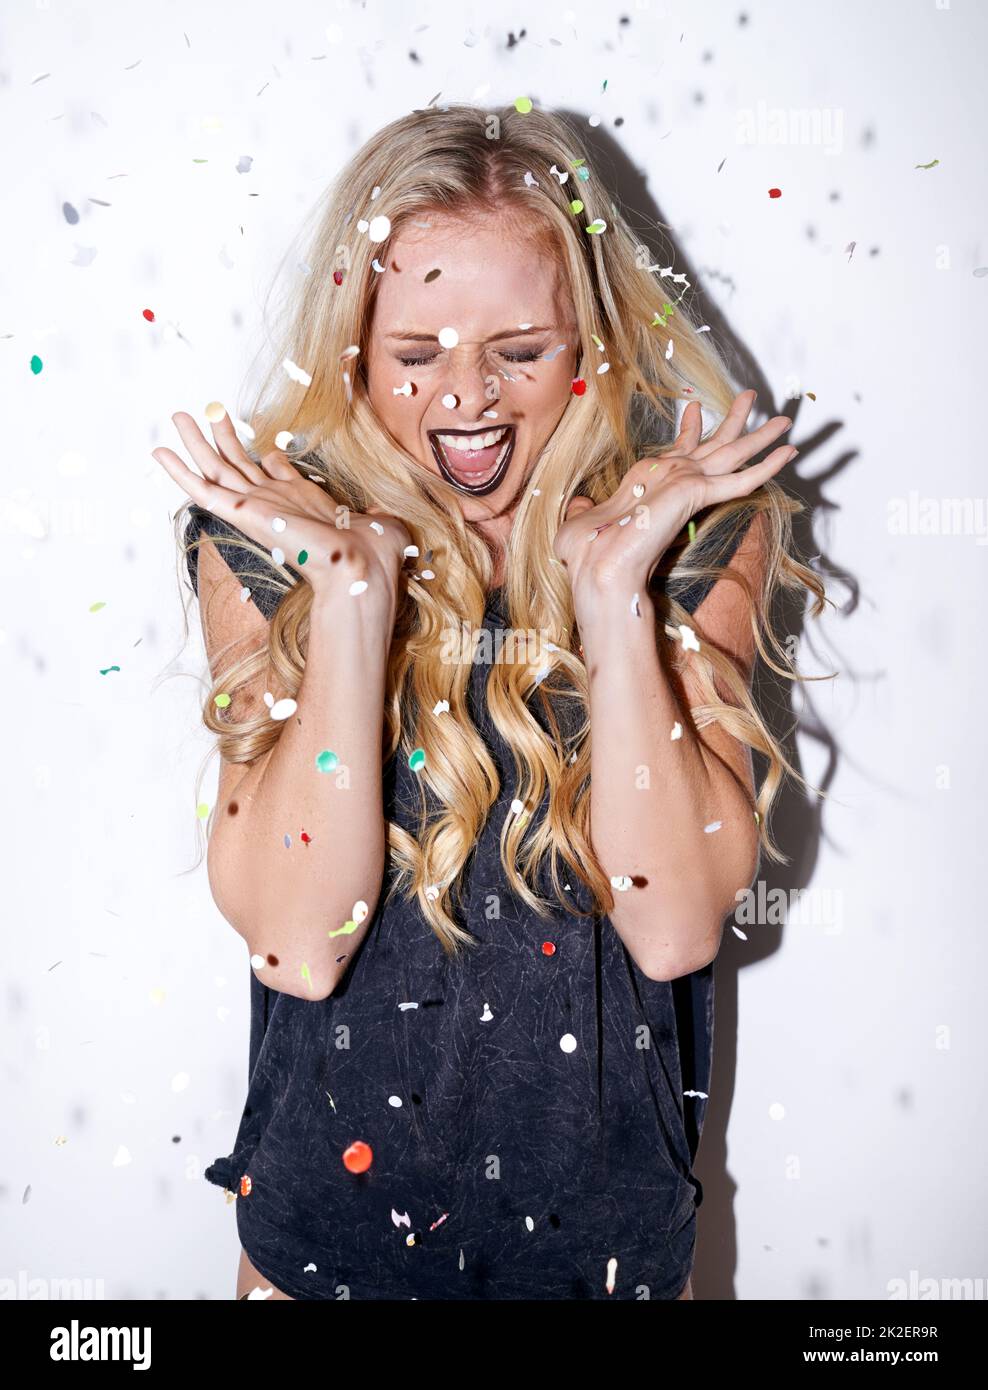 Lets get the party started. Shot of an attractive young woman shouting in excitement as confetti falls down on her. Stock Photo